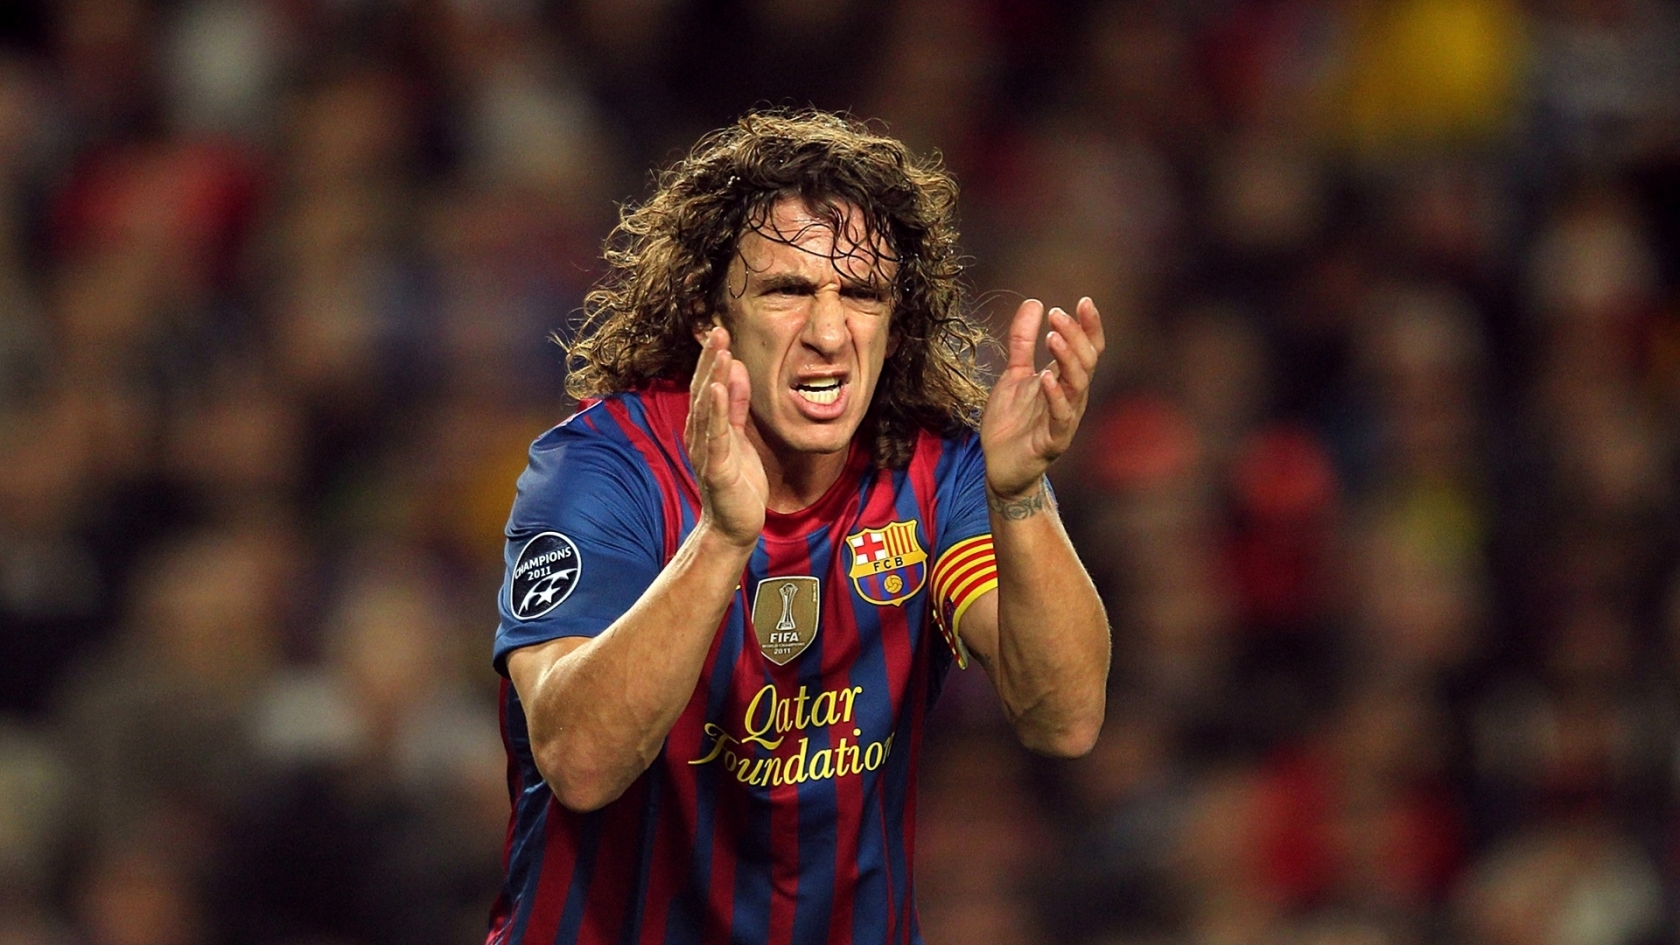 Carles Puyol Urging for 1680 x 945 HDTV resolution